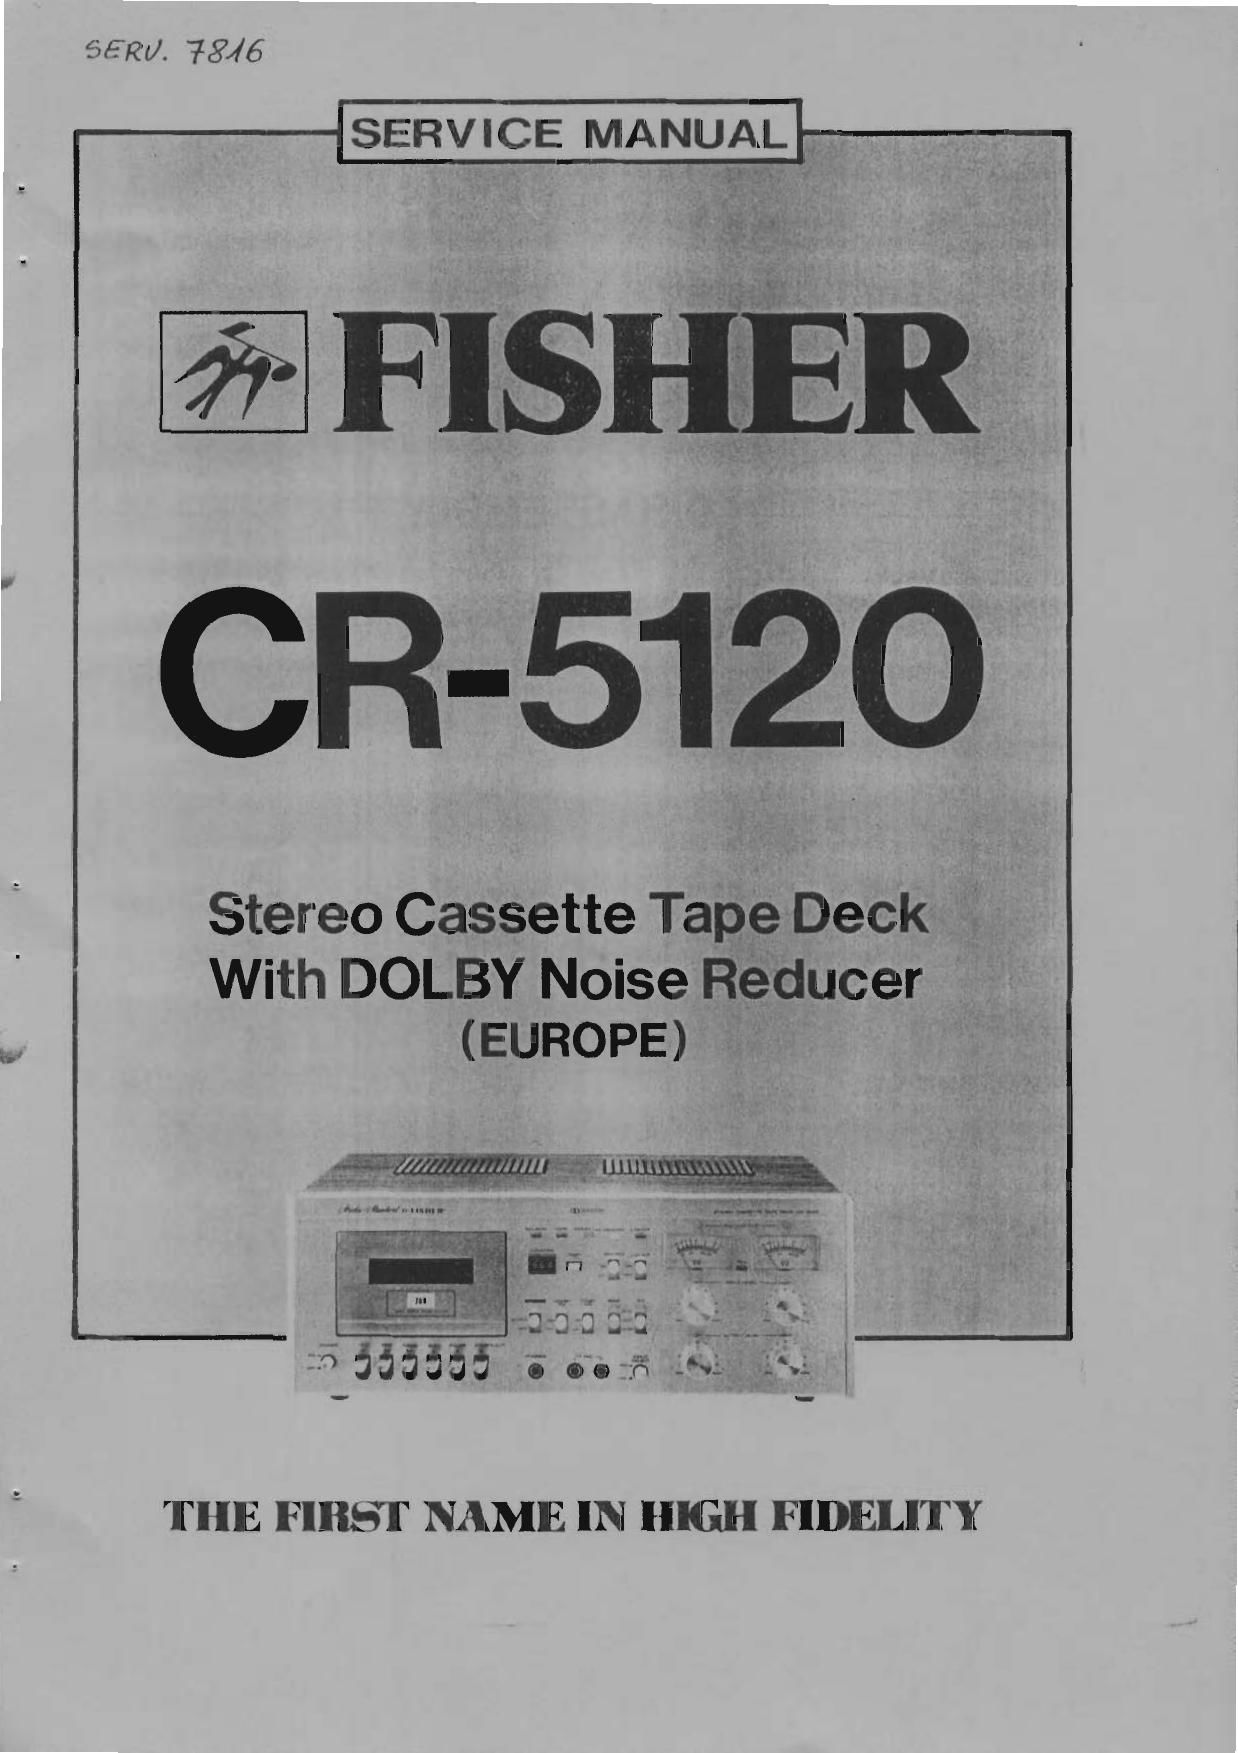 Fisher CR 5120 Service Manual